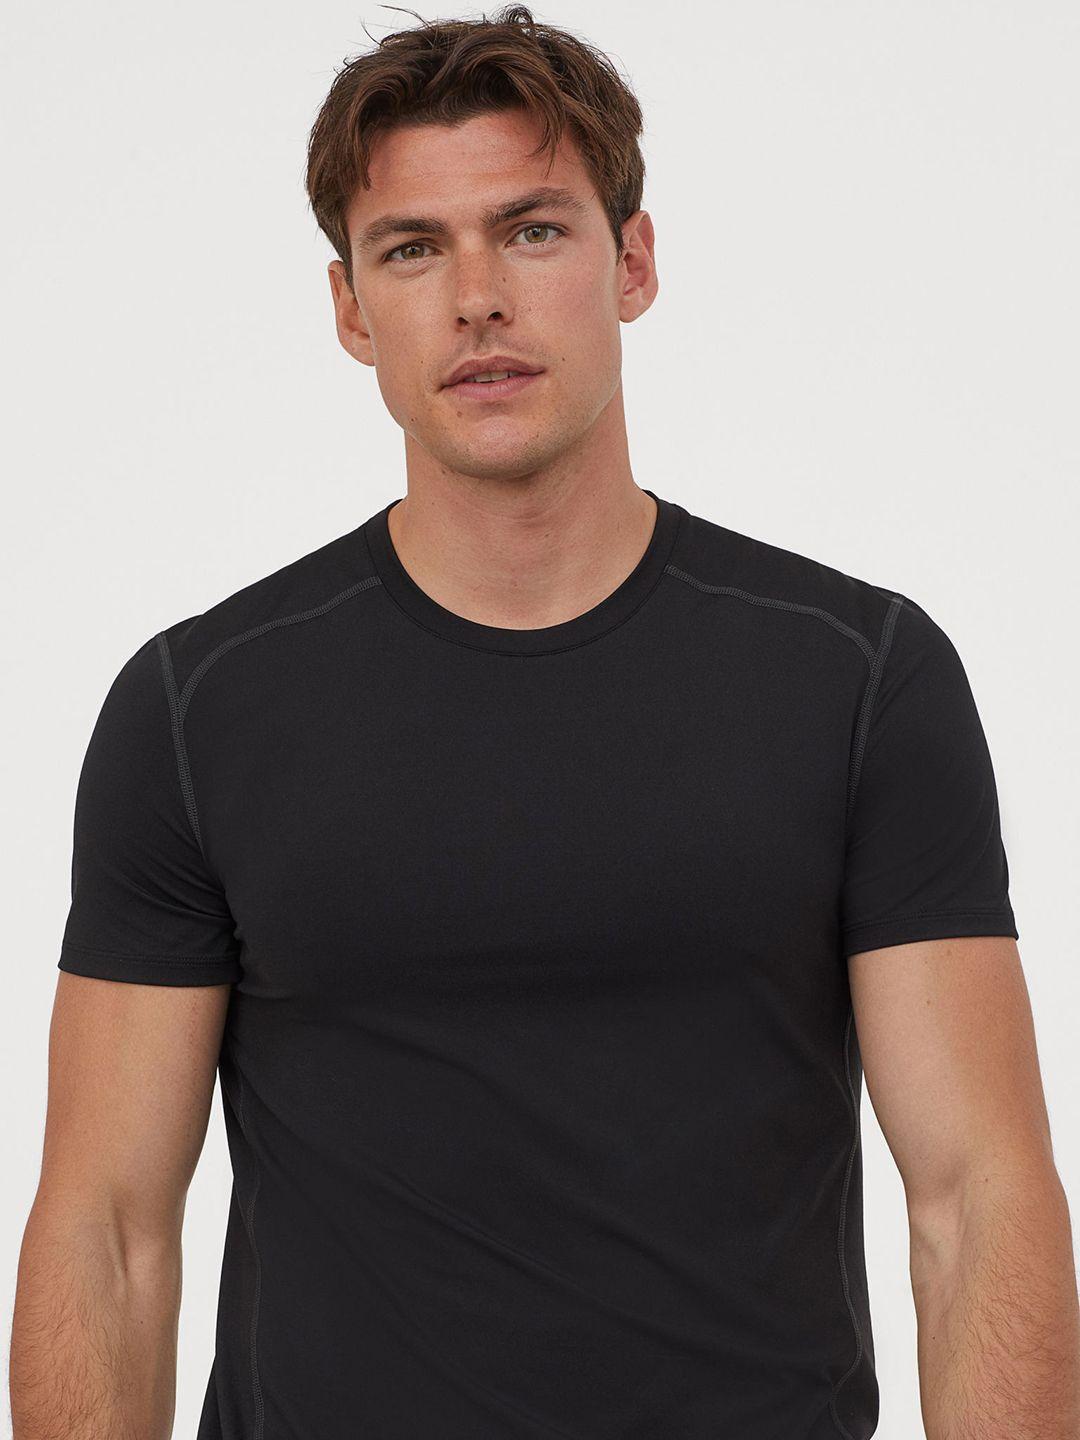 h&m men black solid slim fit sports sustainable t-shirt